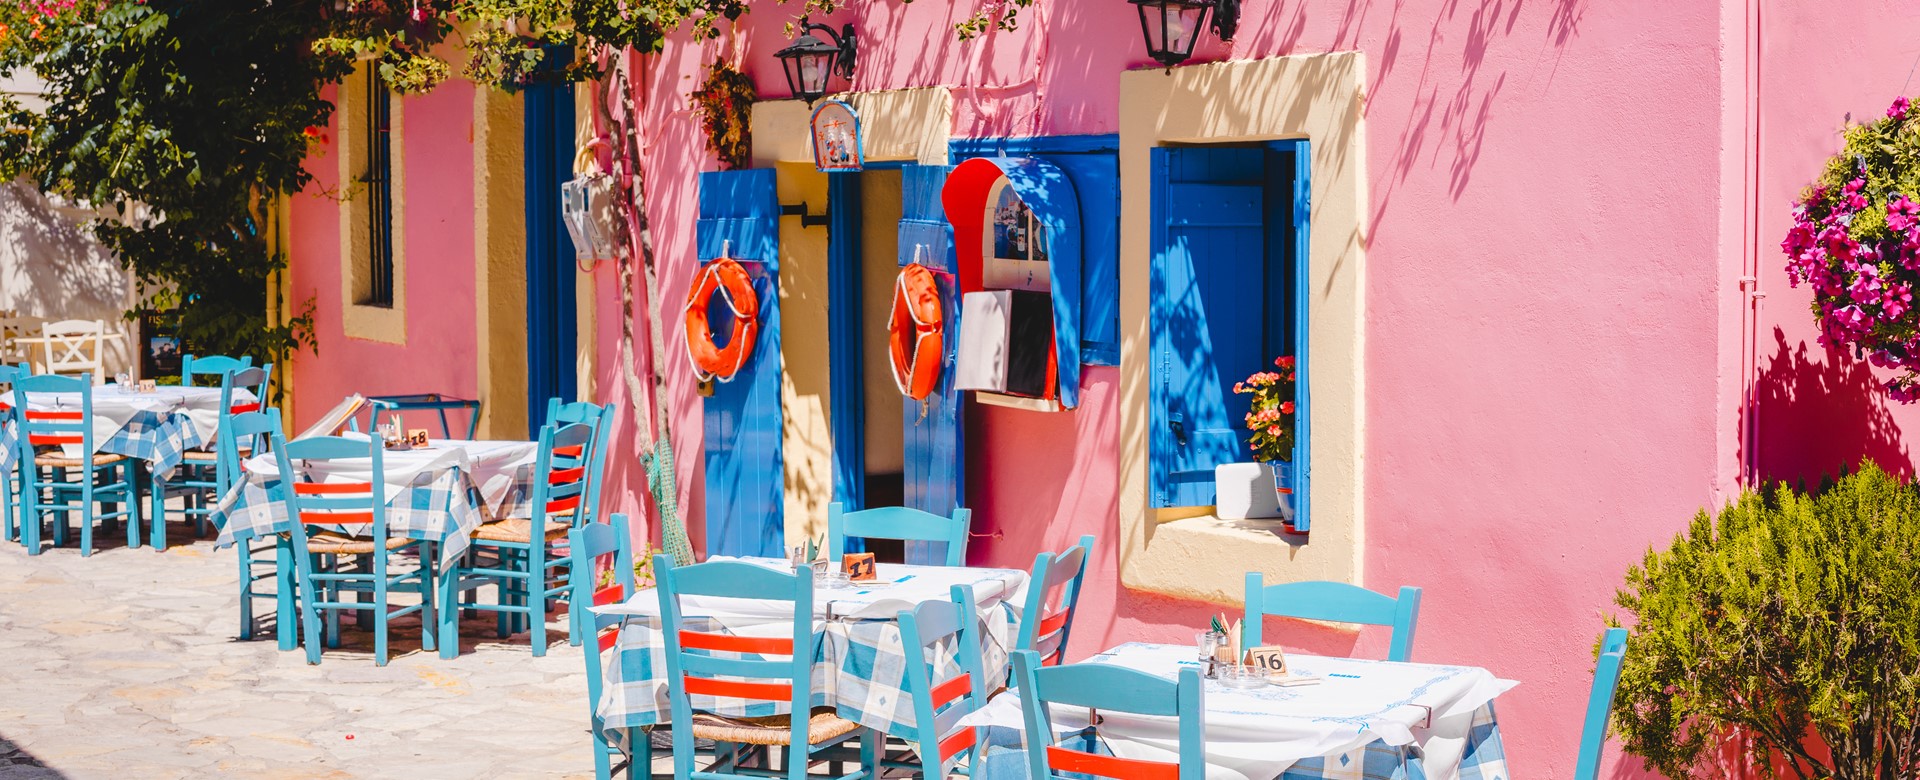 Traditional Greek Taverna's offer great refreshements during your holiday in Kefalonia, Greek Islands